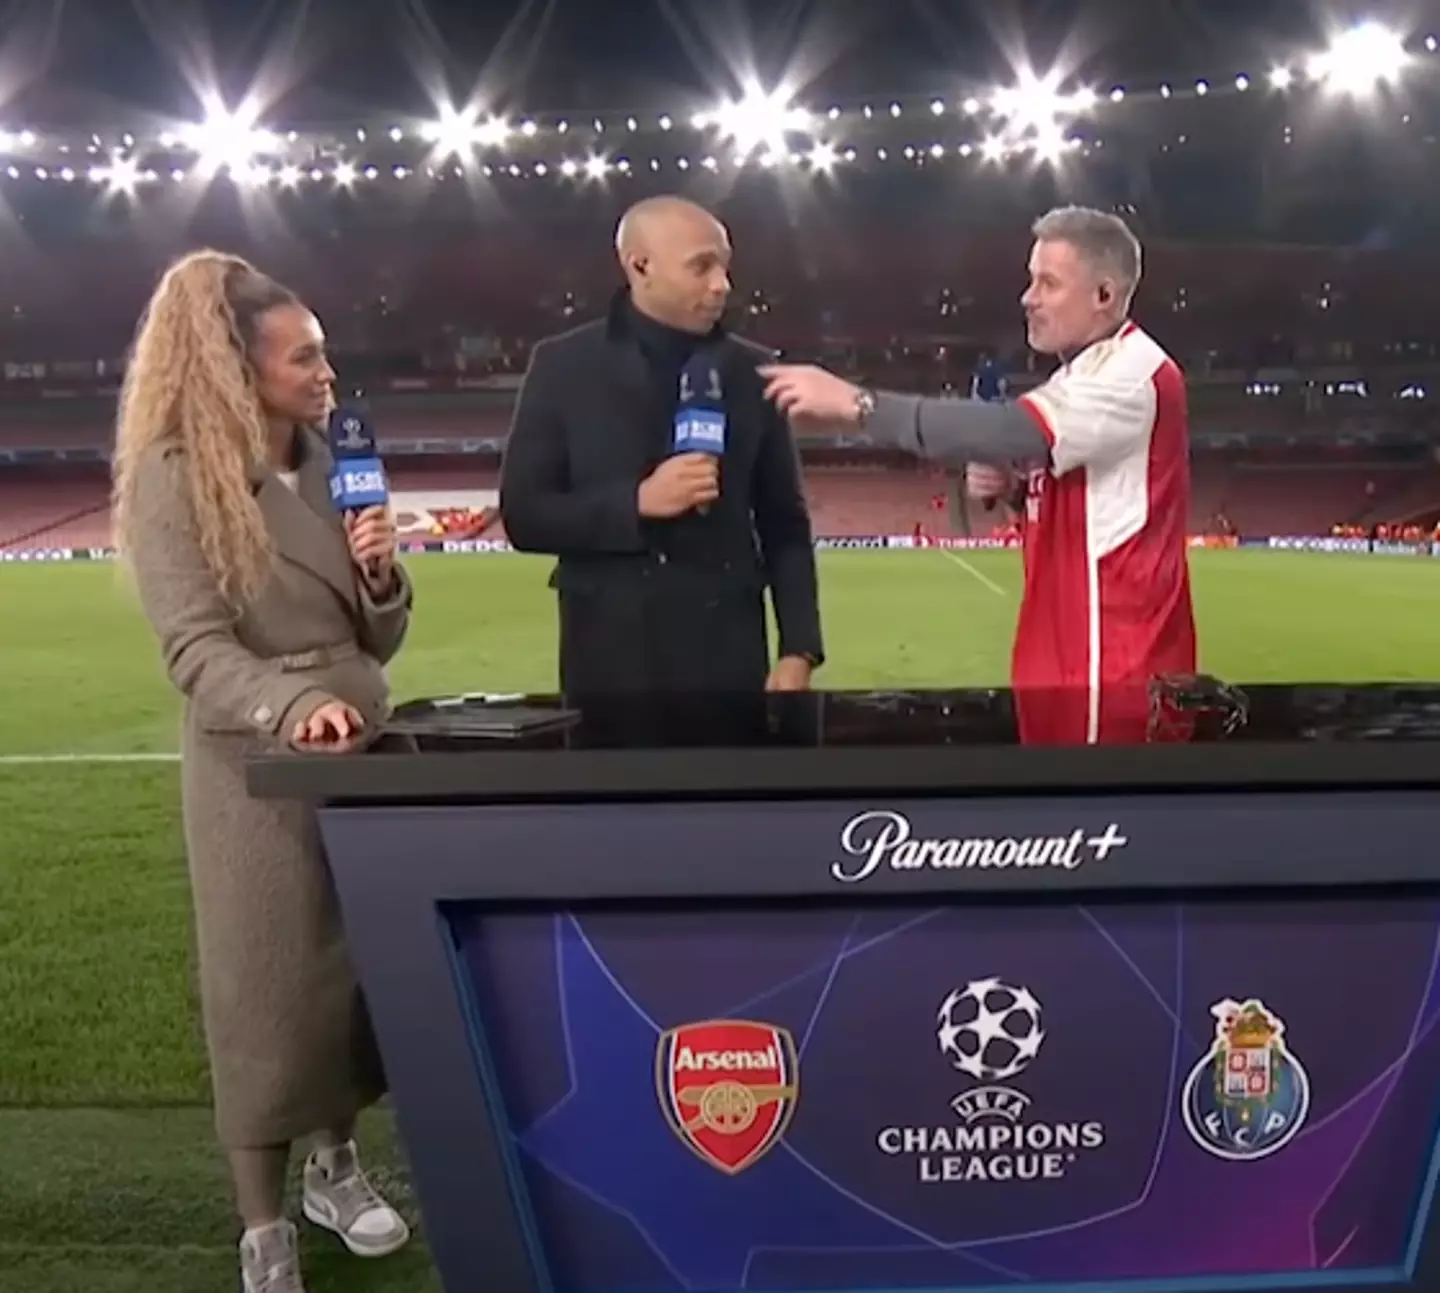 Viewers have slammed Jamie Carragher's controversial joke aimed at Kate Abdo.